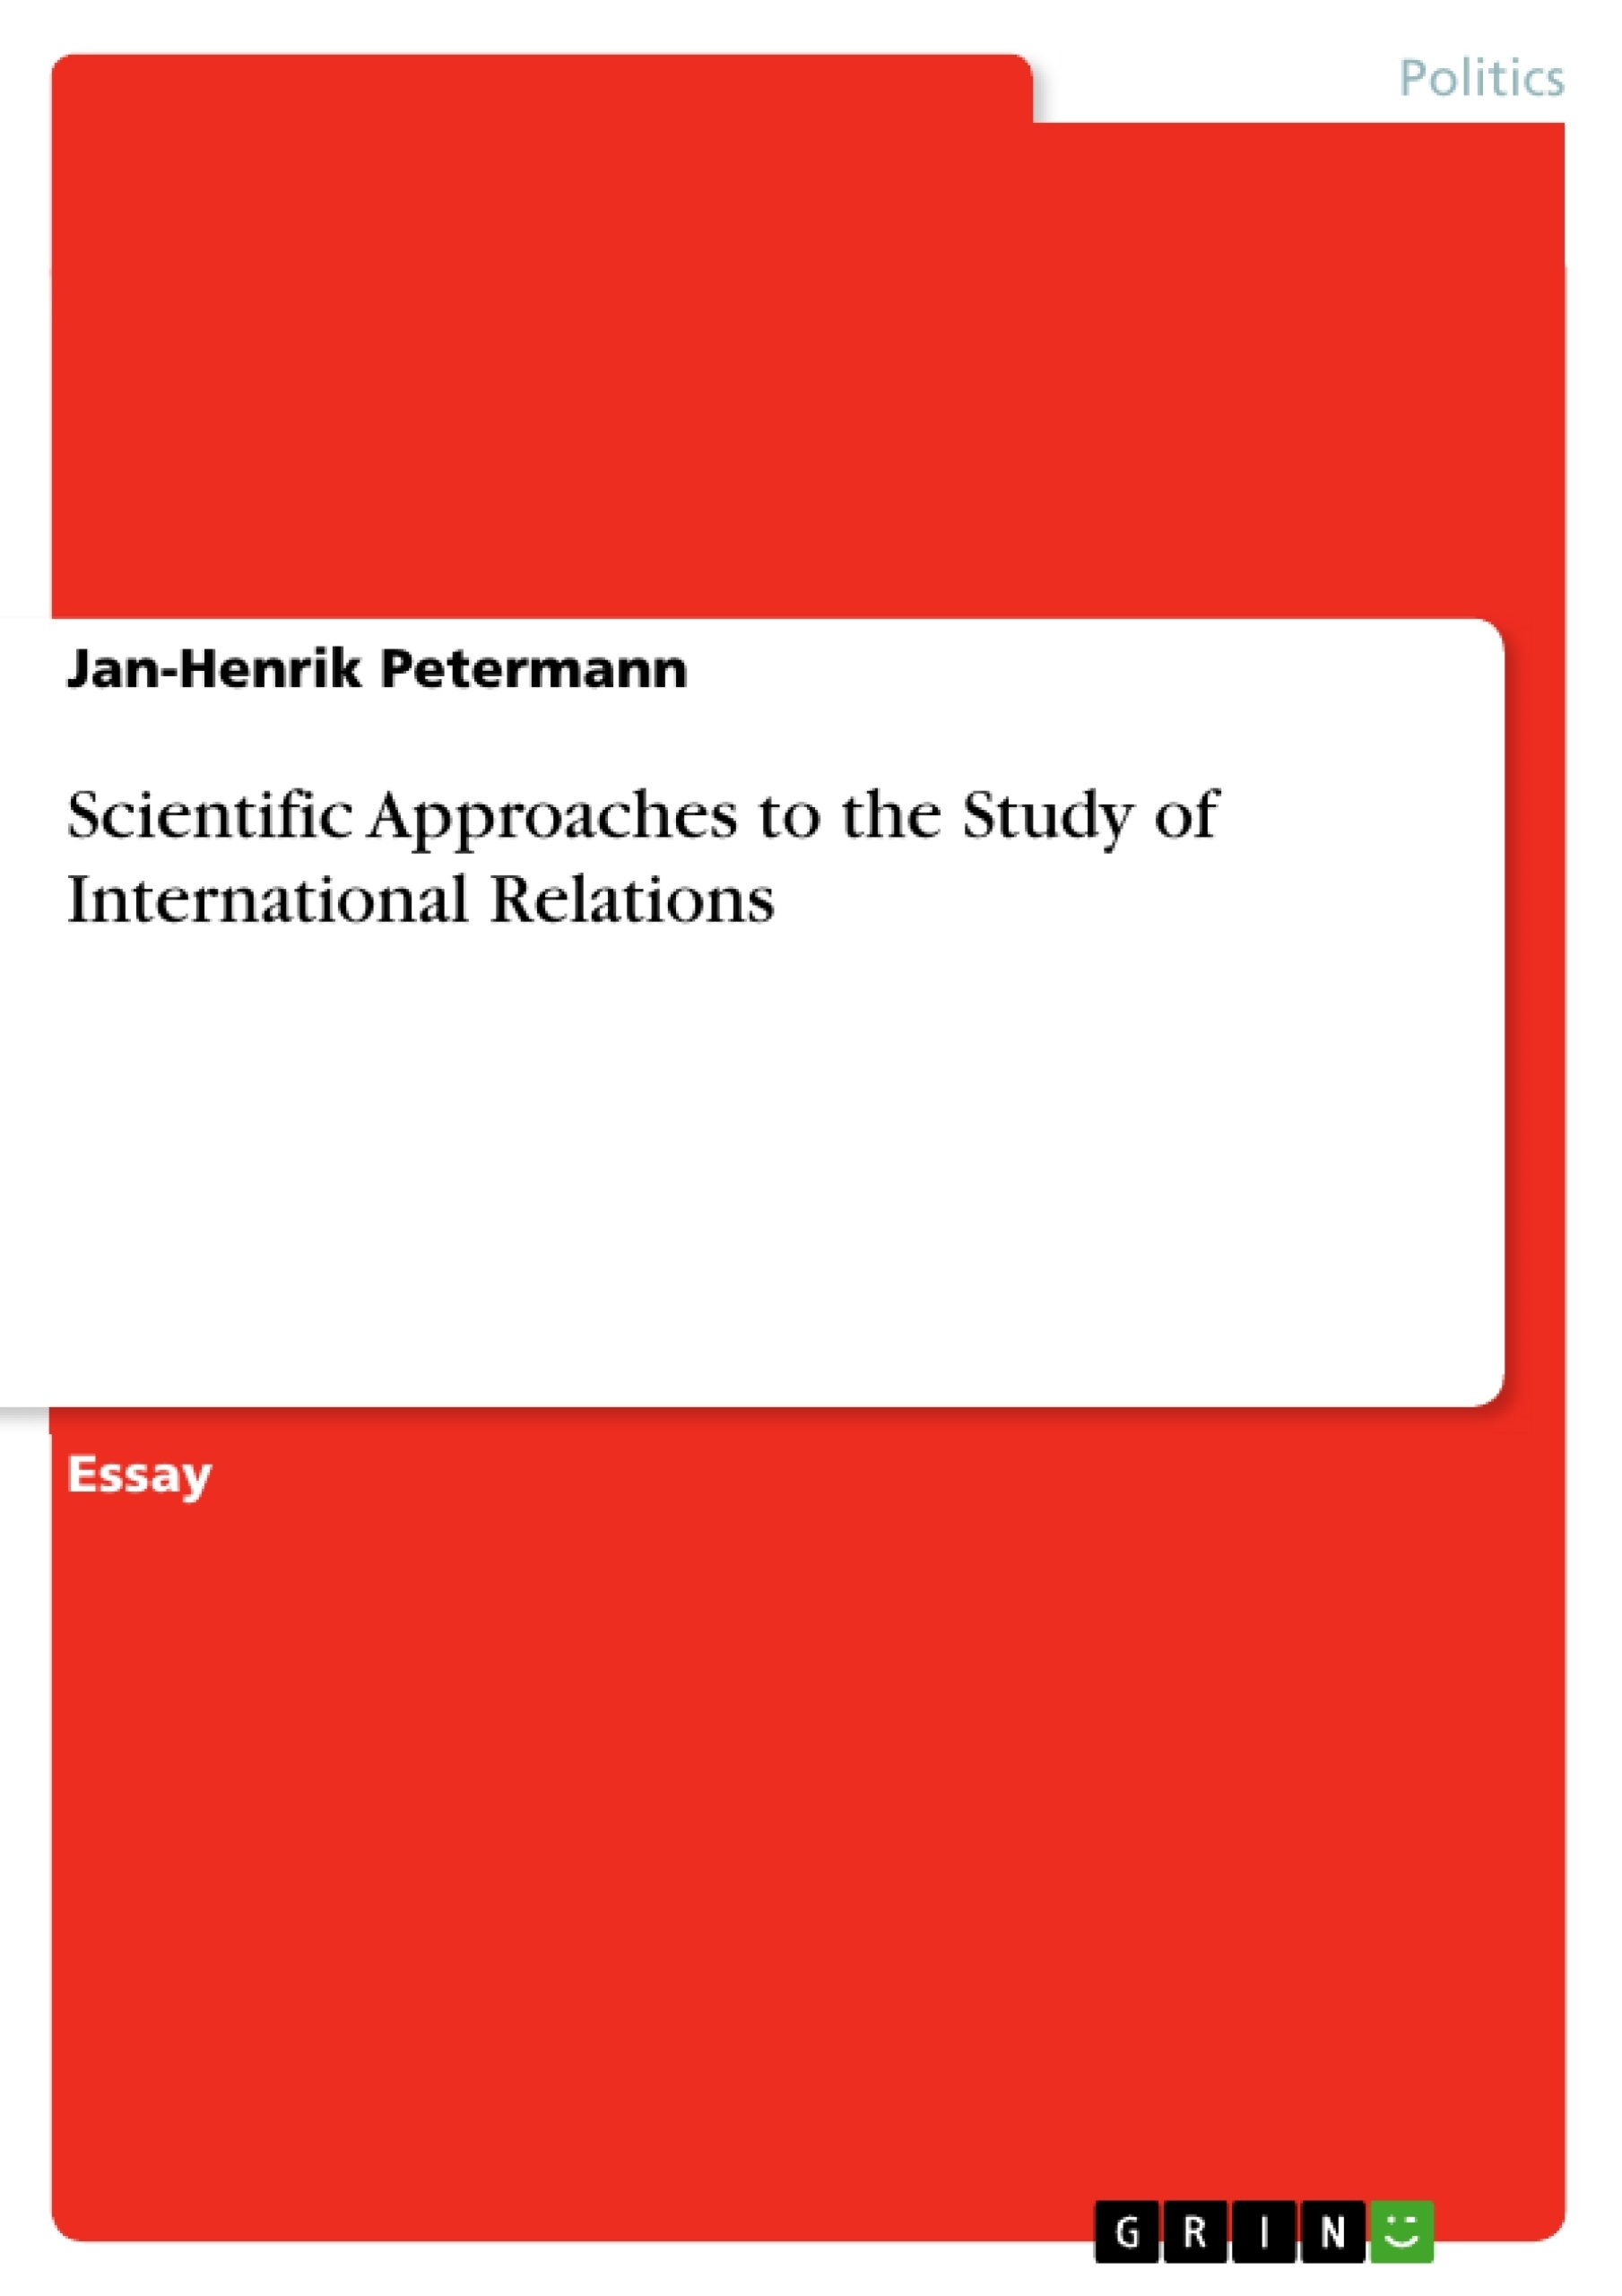 Title: Scientific Approaches to the Study of International Relations